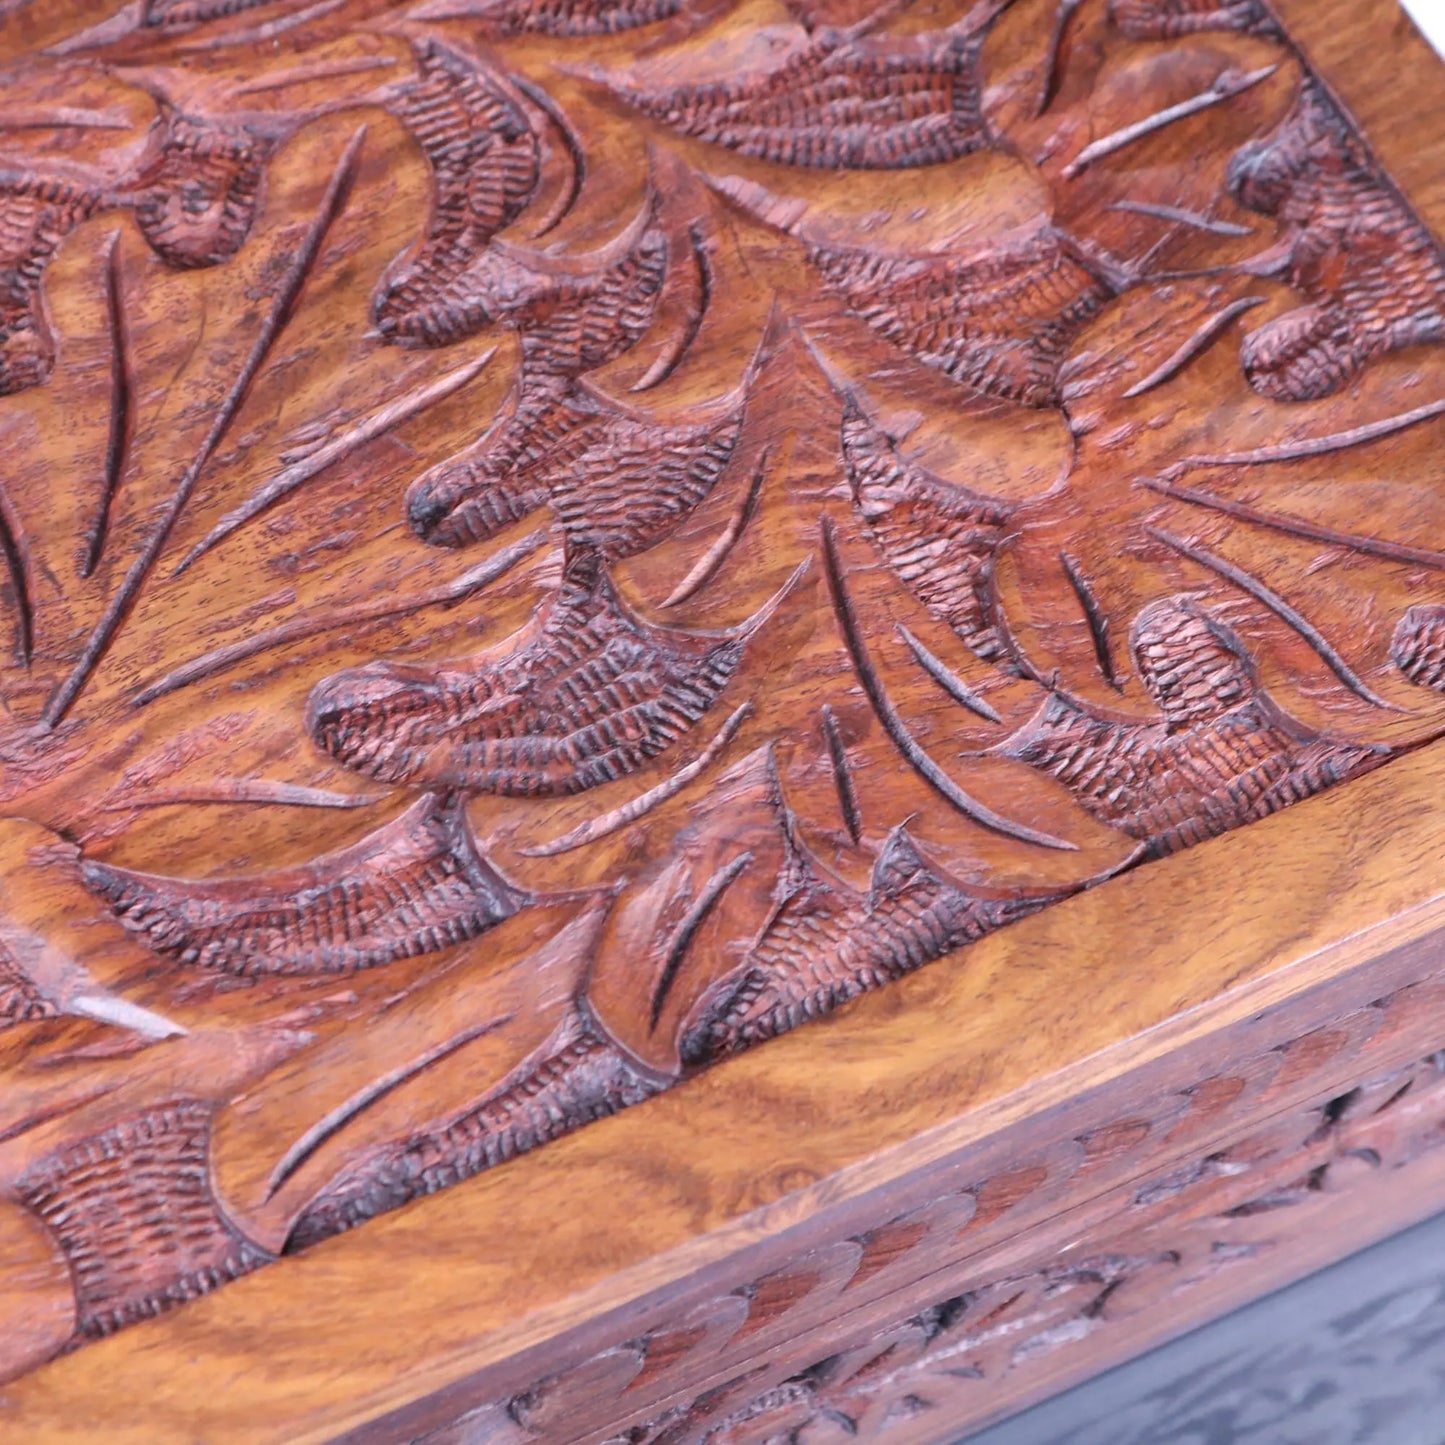 Zopui Large Carved Storage Box - Closeup of Carving